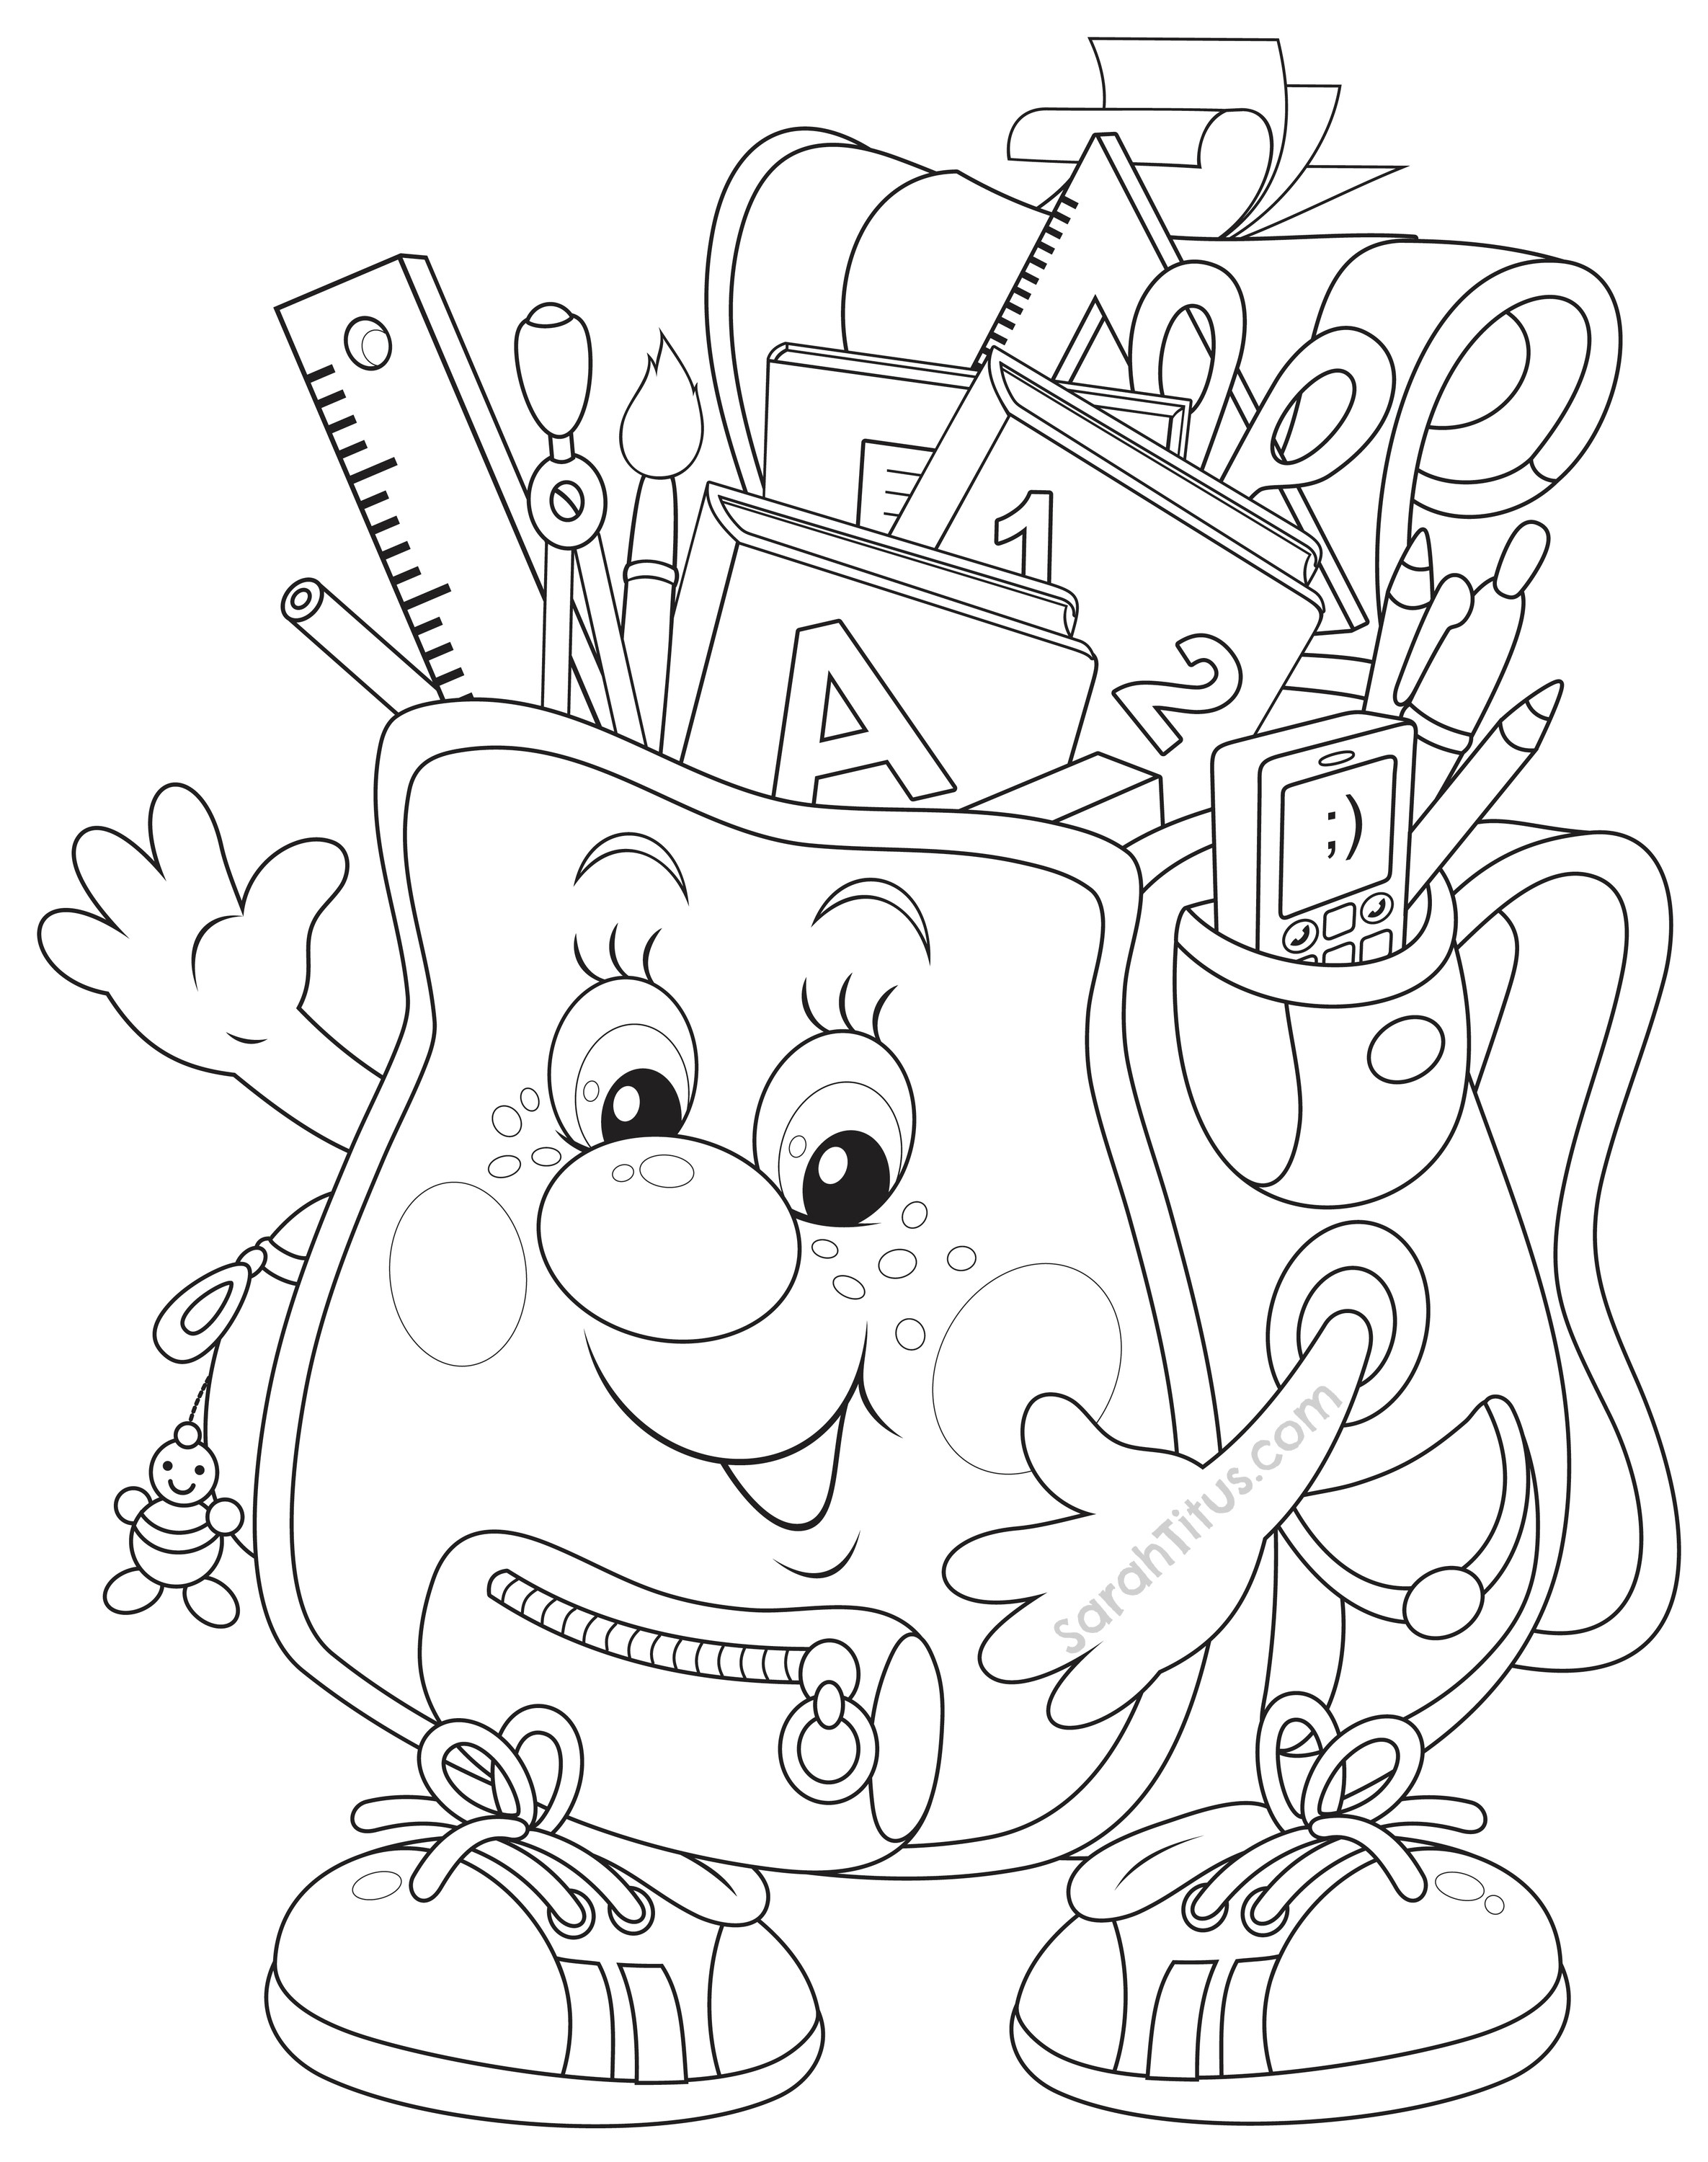 Printable Coloring Pages For Boys In First Grade
 Back to School Coloring Pages Sarah Titus